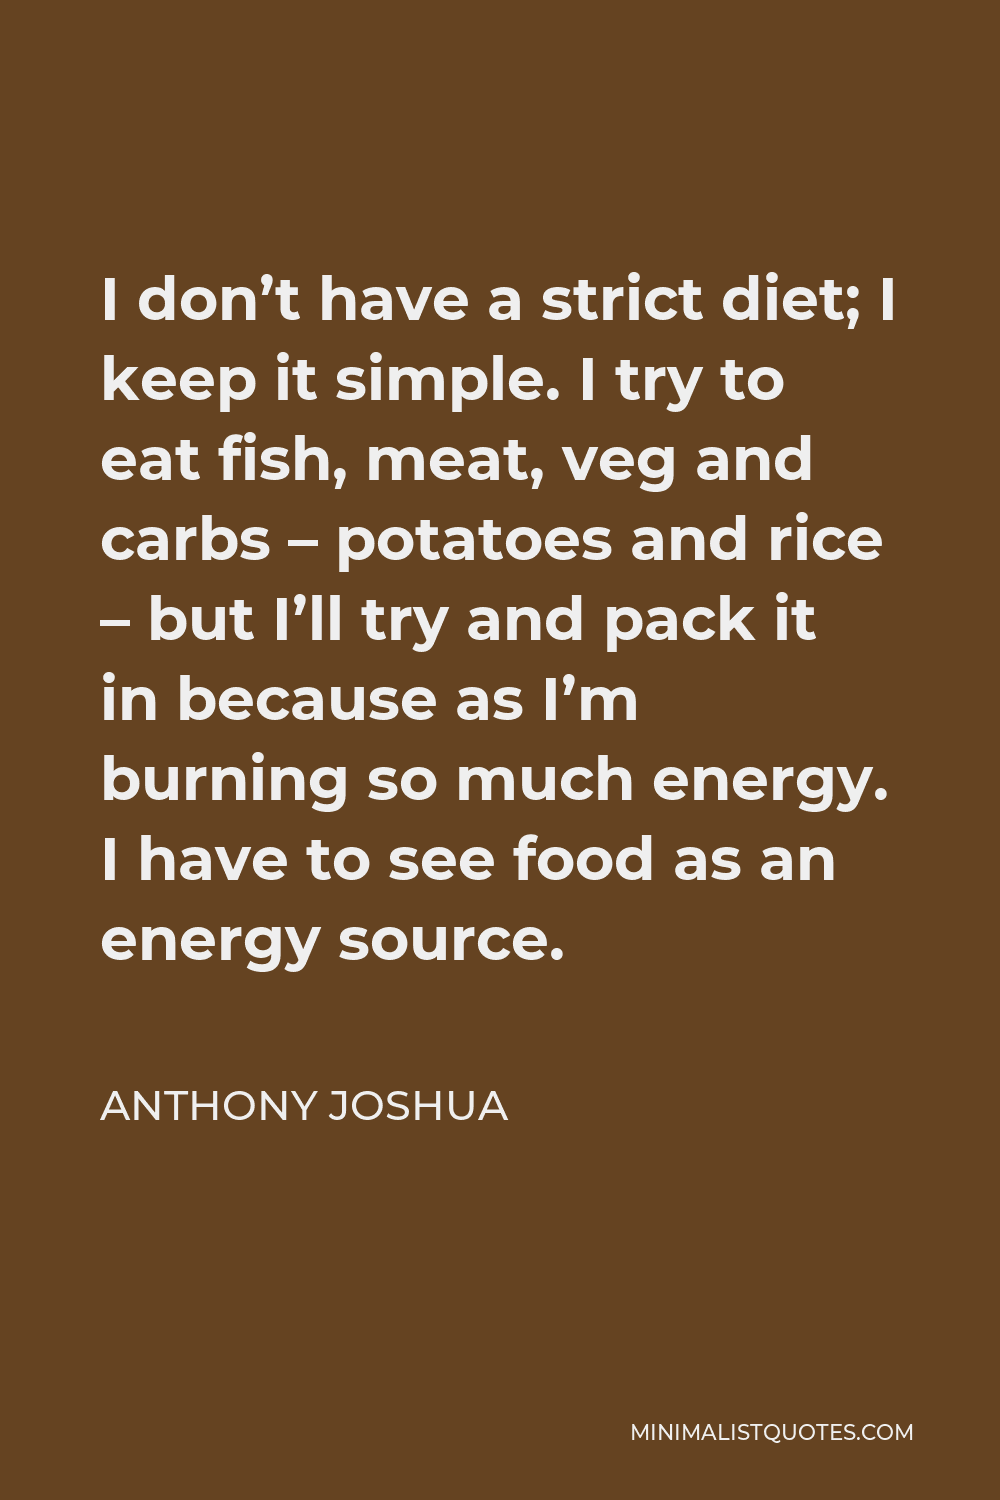 Anthony Joshua Quote - I don’t have a strict diet; I keep it simple. I try to eat fish, meat, veg and carbs – potatoes and rice – but I’ll try and pack it in because as I’m burning so much energy. I have to see food as an energy source.